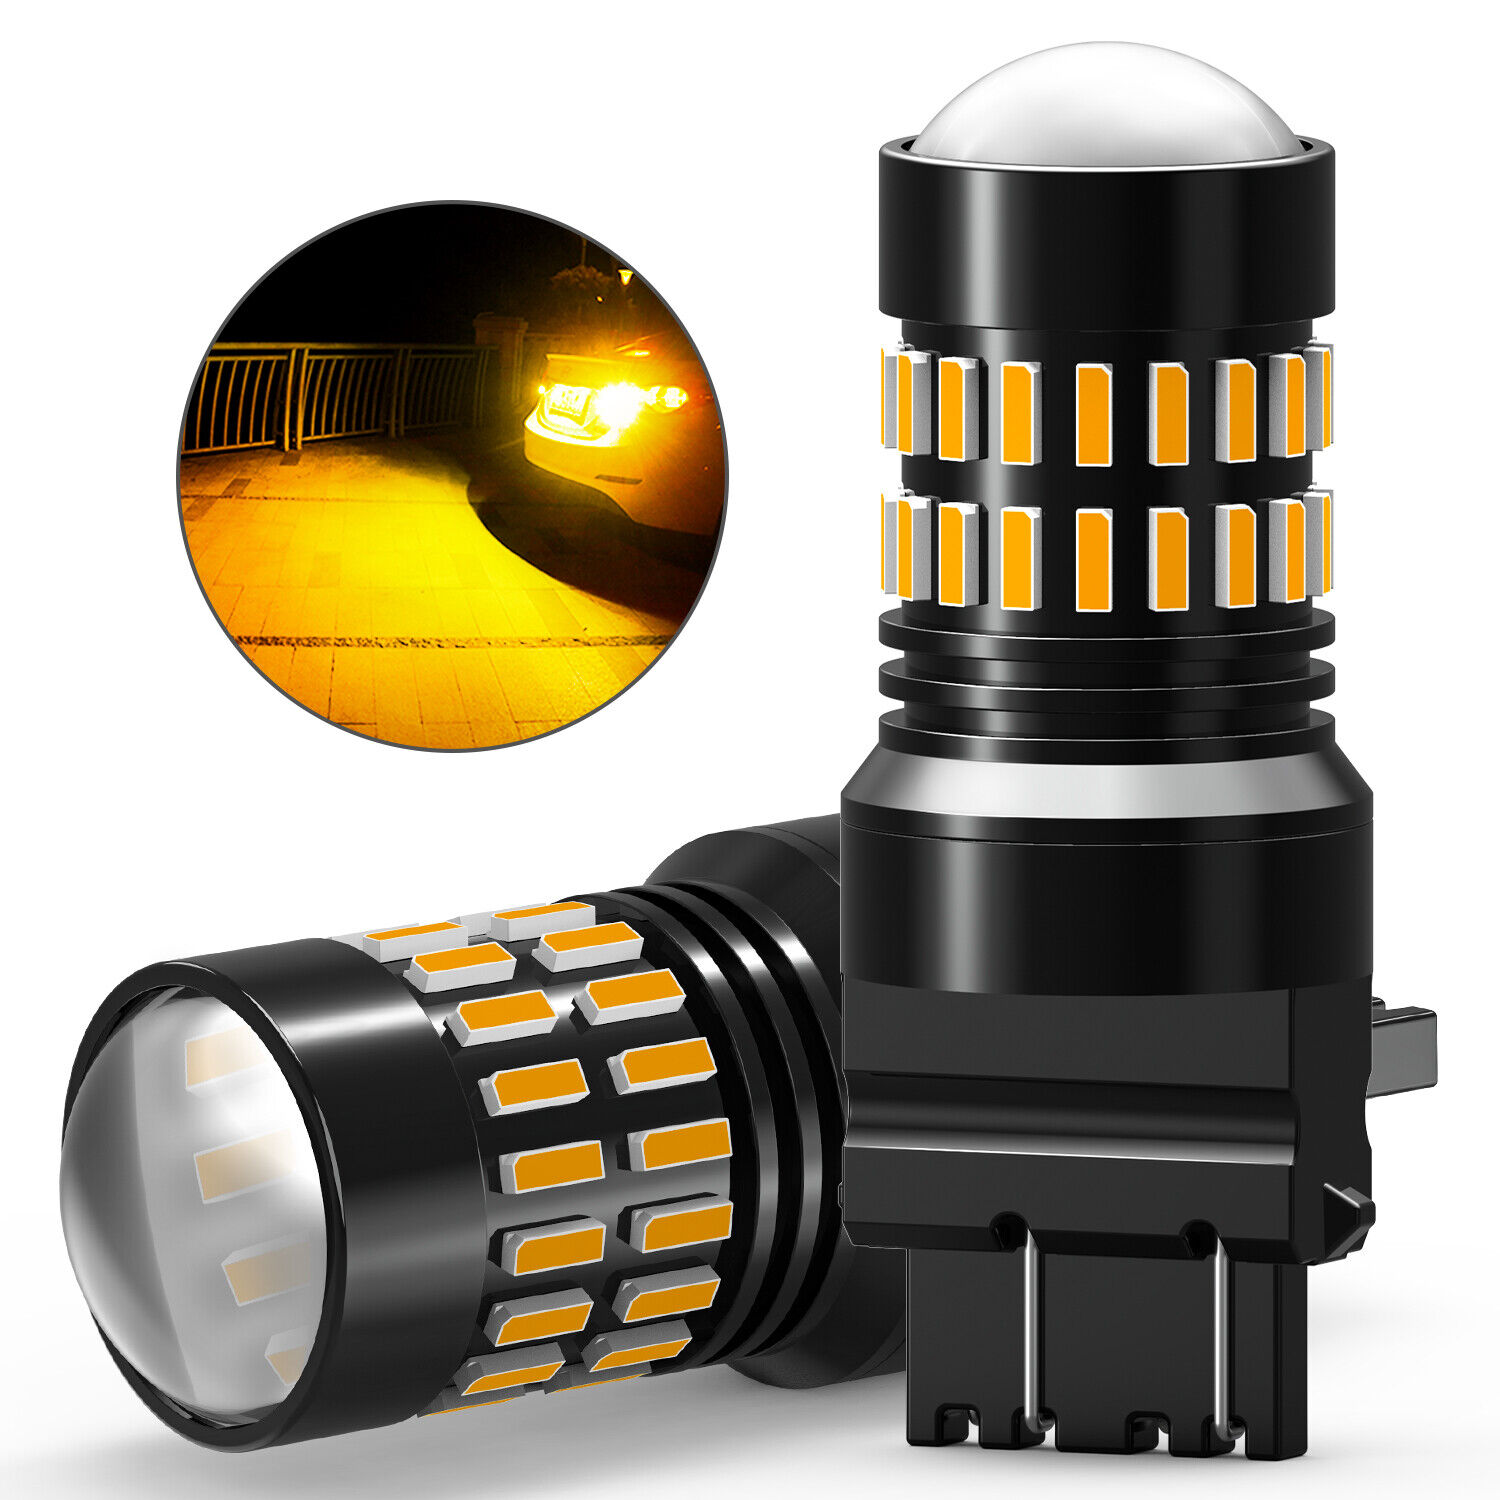 AUXITO 2X 3157 Turn Signal Light 3757A Canbus Amber LED Bulbs for Car Truck SUV